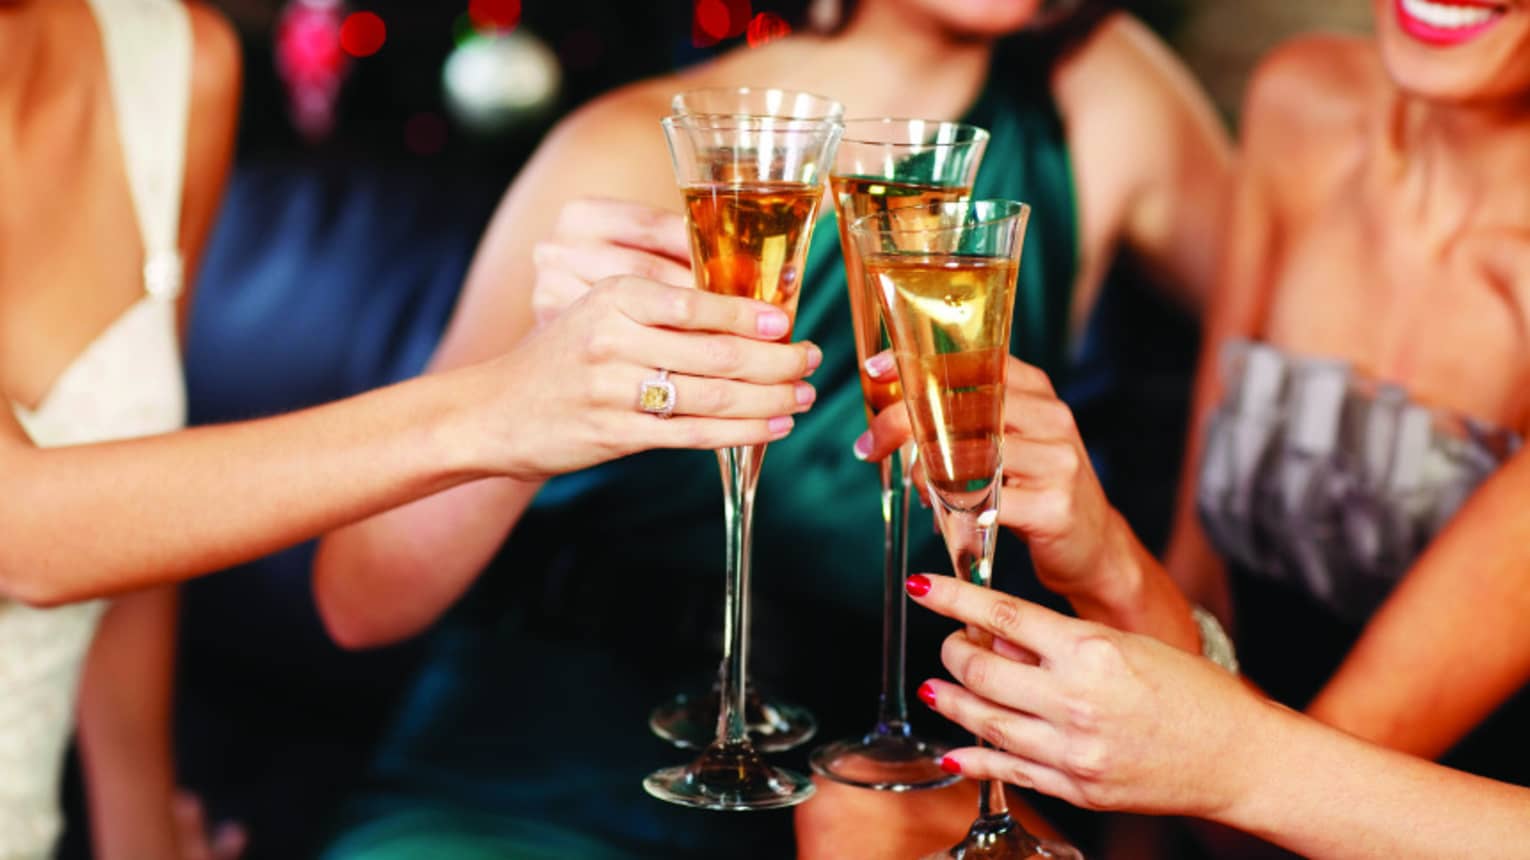 Close-up of women in evening gowns toasting with glasses of Champagne